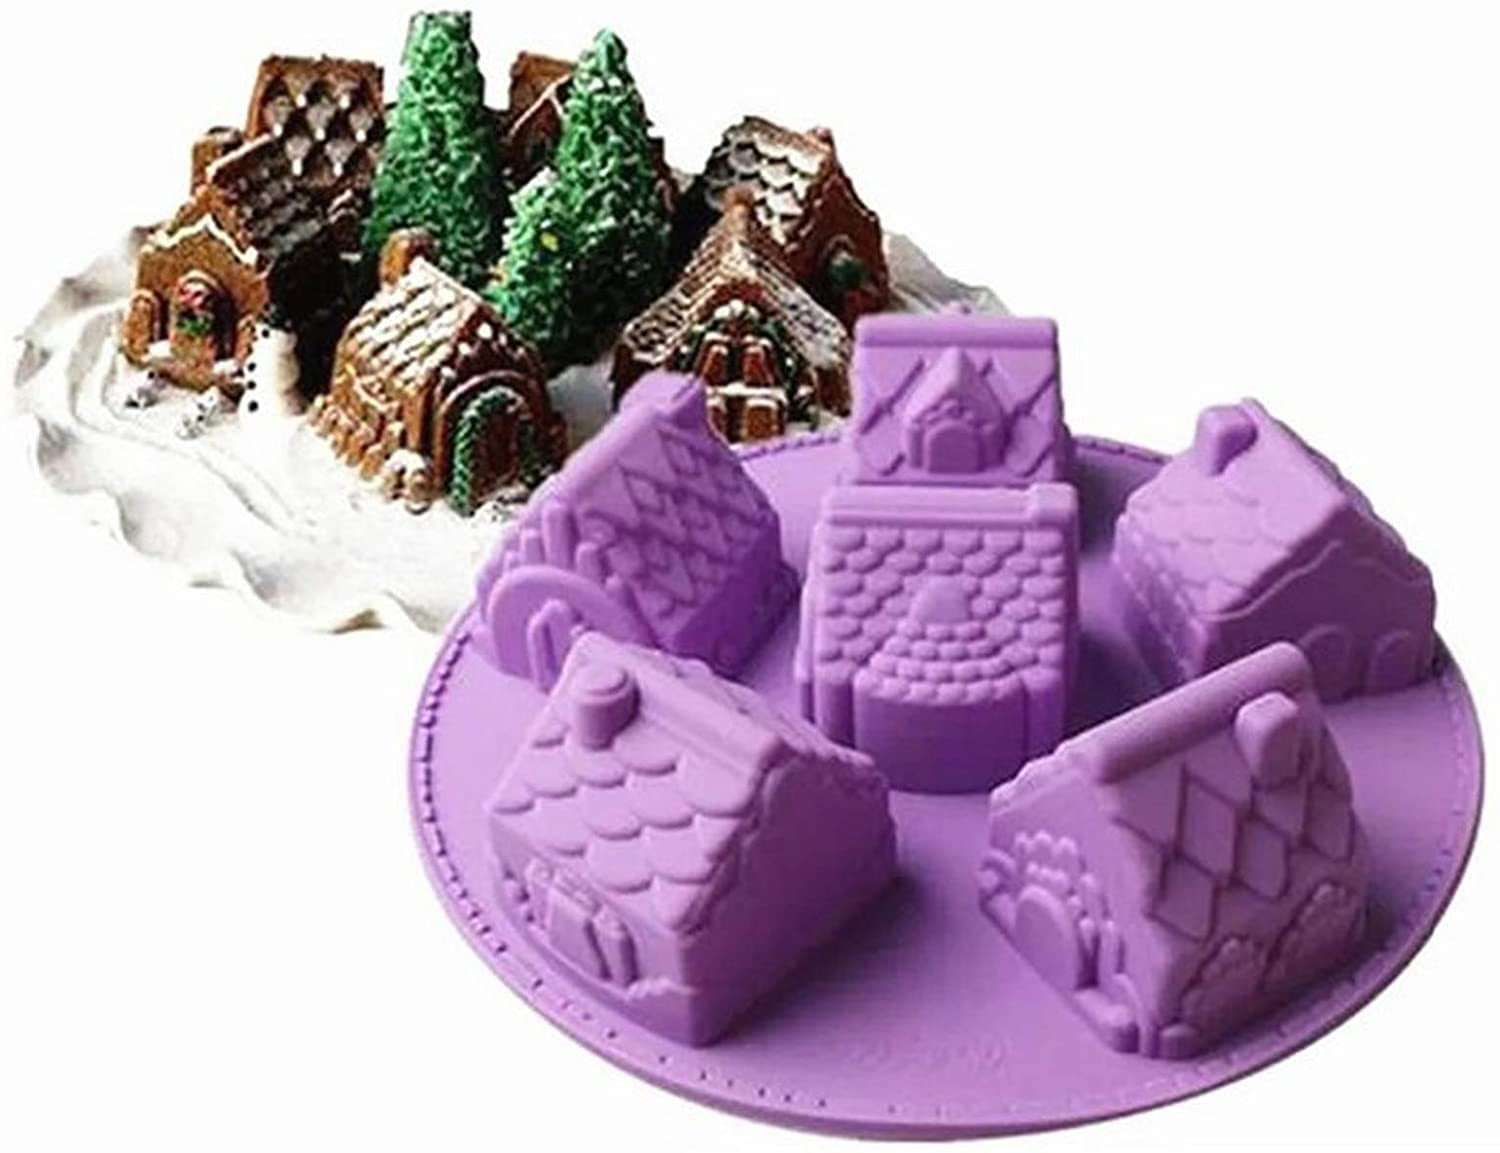 Tupperware Snowman Christmas Holiday Silicone Baking Form Mold Purple New